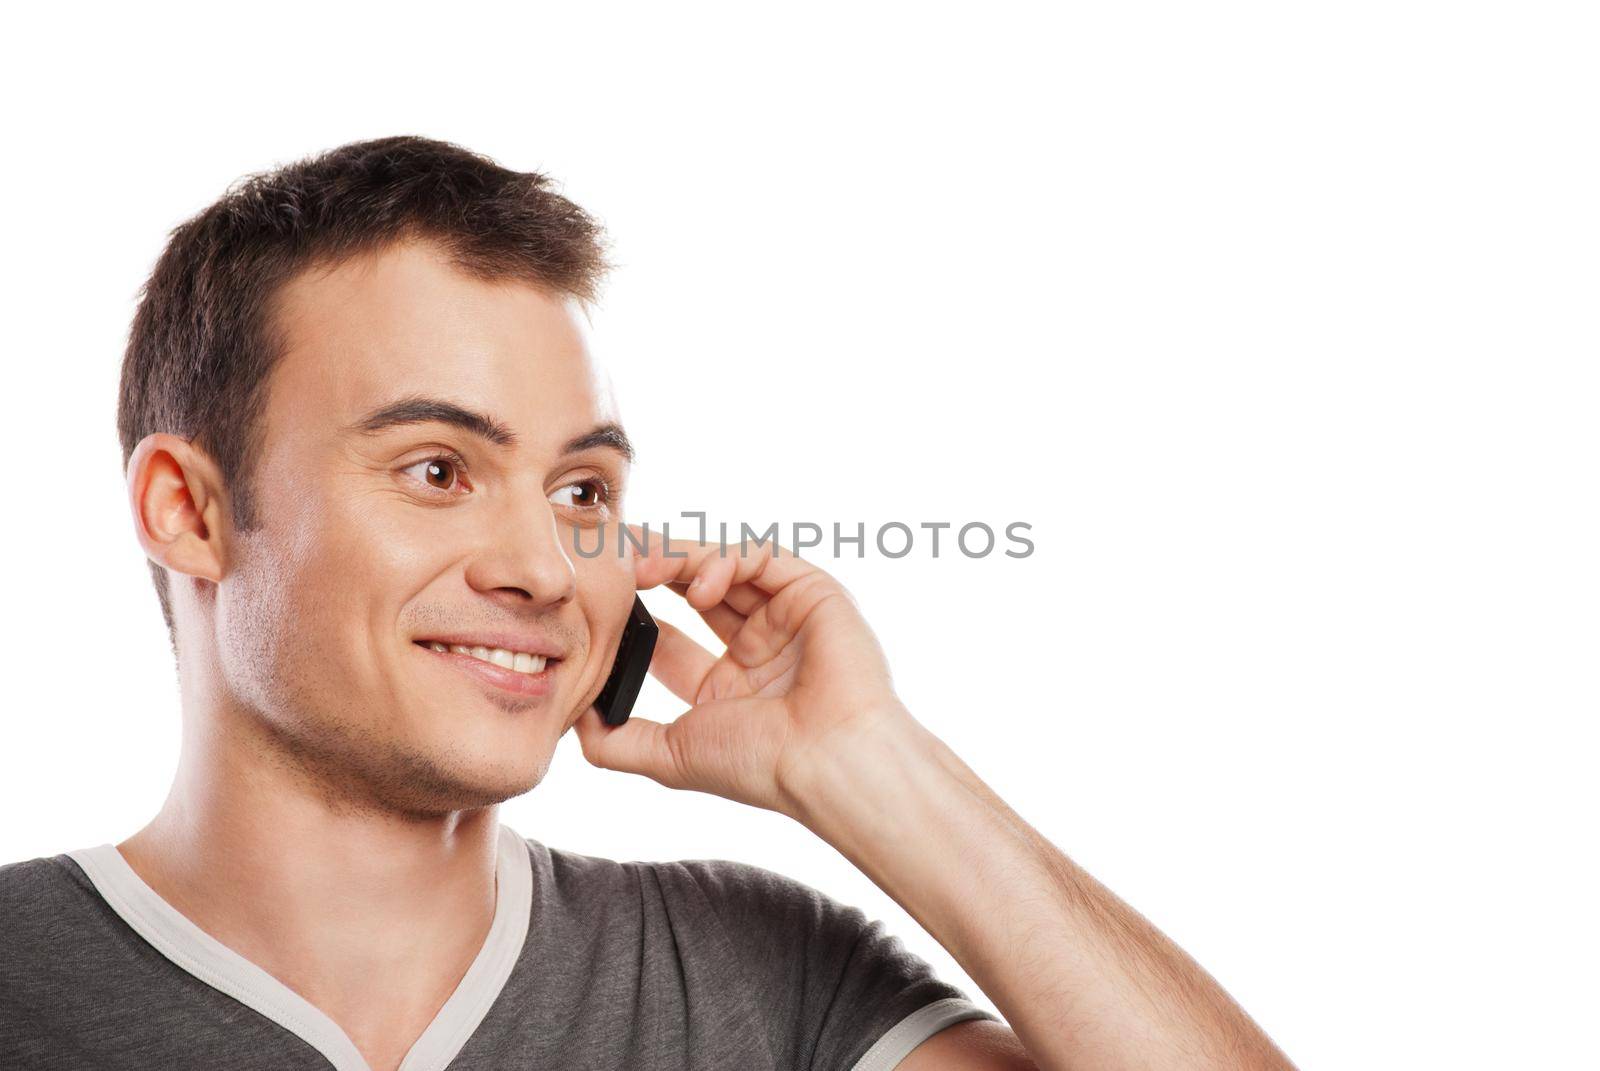 Young and healthy man answering the phone against a white background